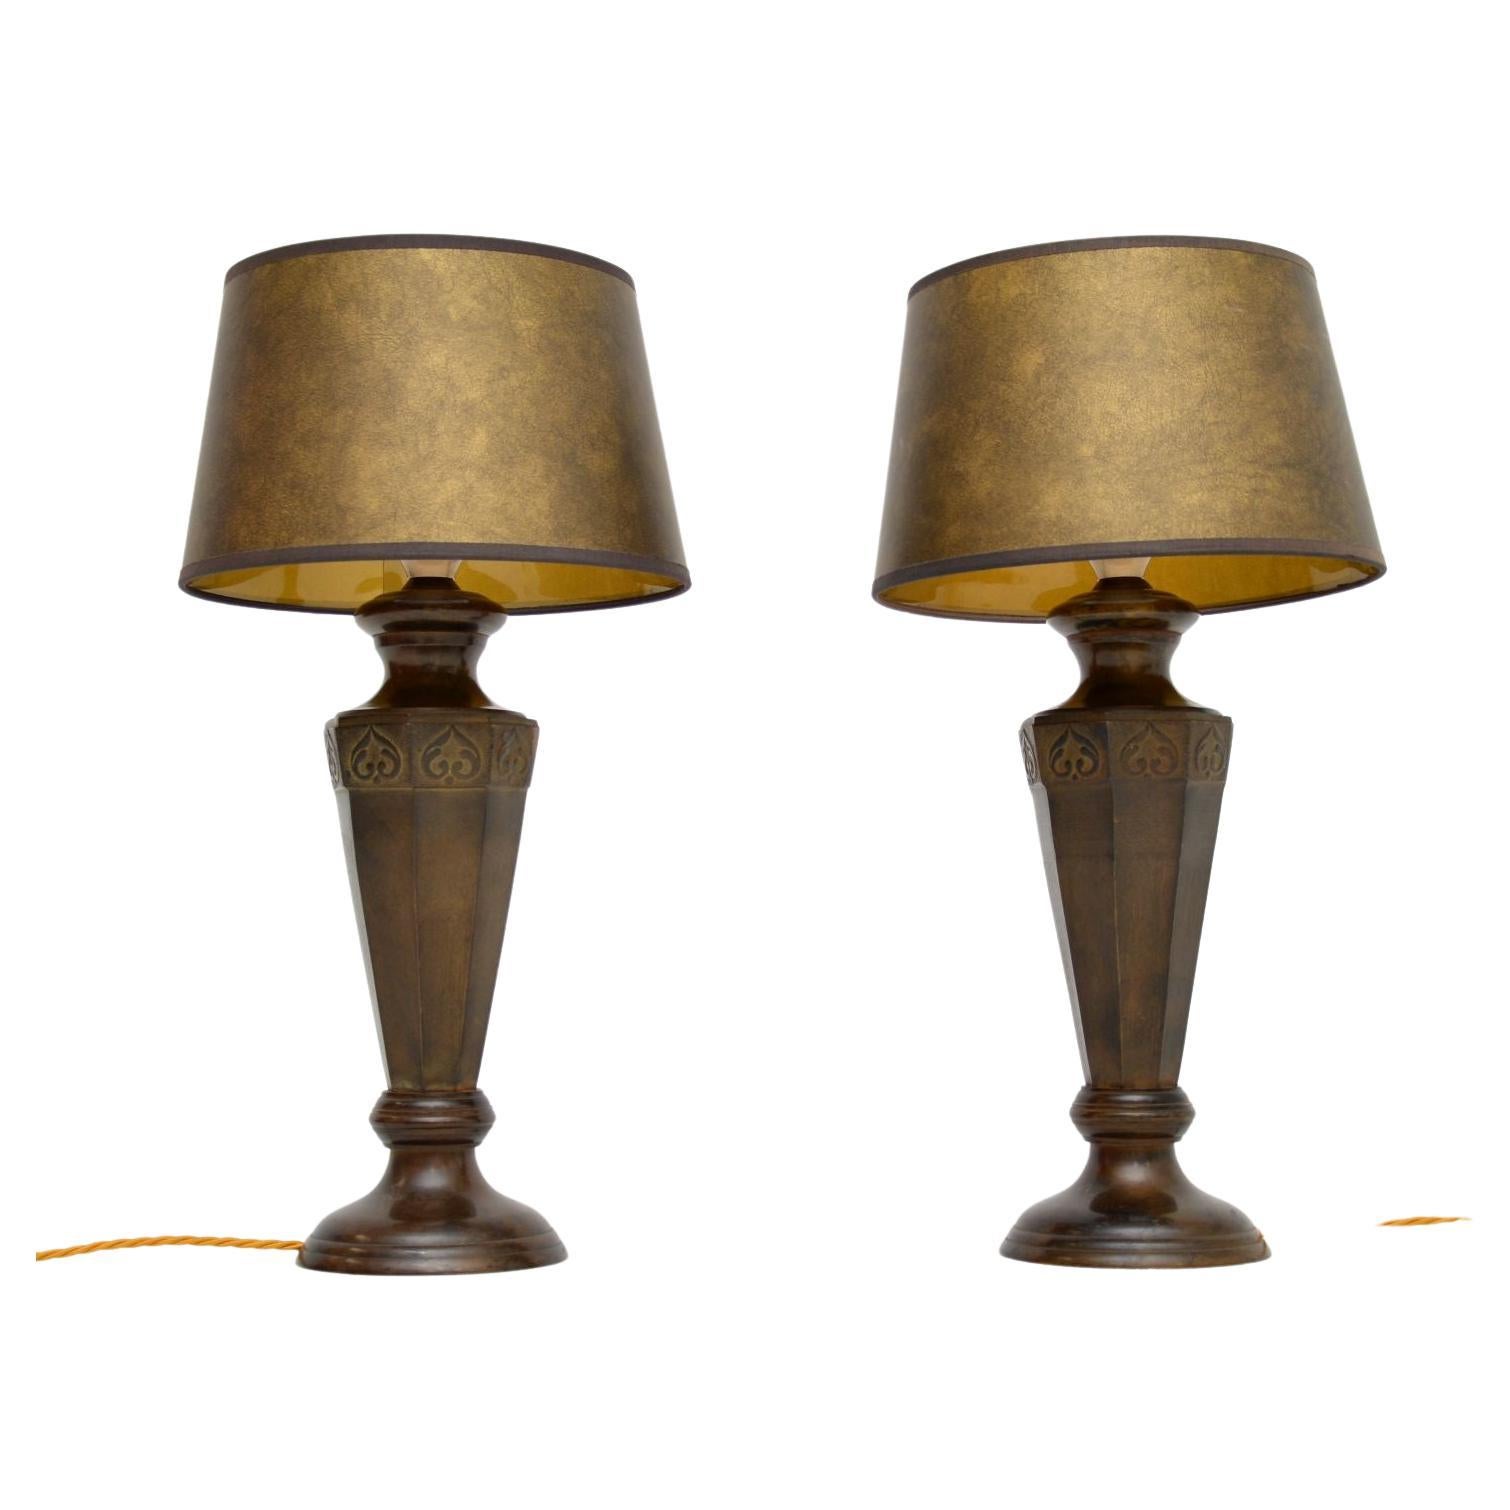 Pair of Antique Neoclassical Style Solid Bronze Table Lamps For Sale